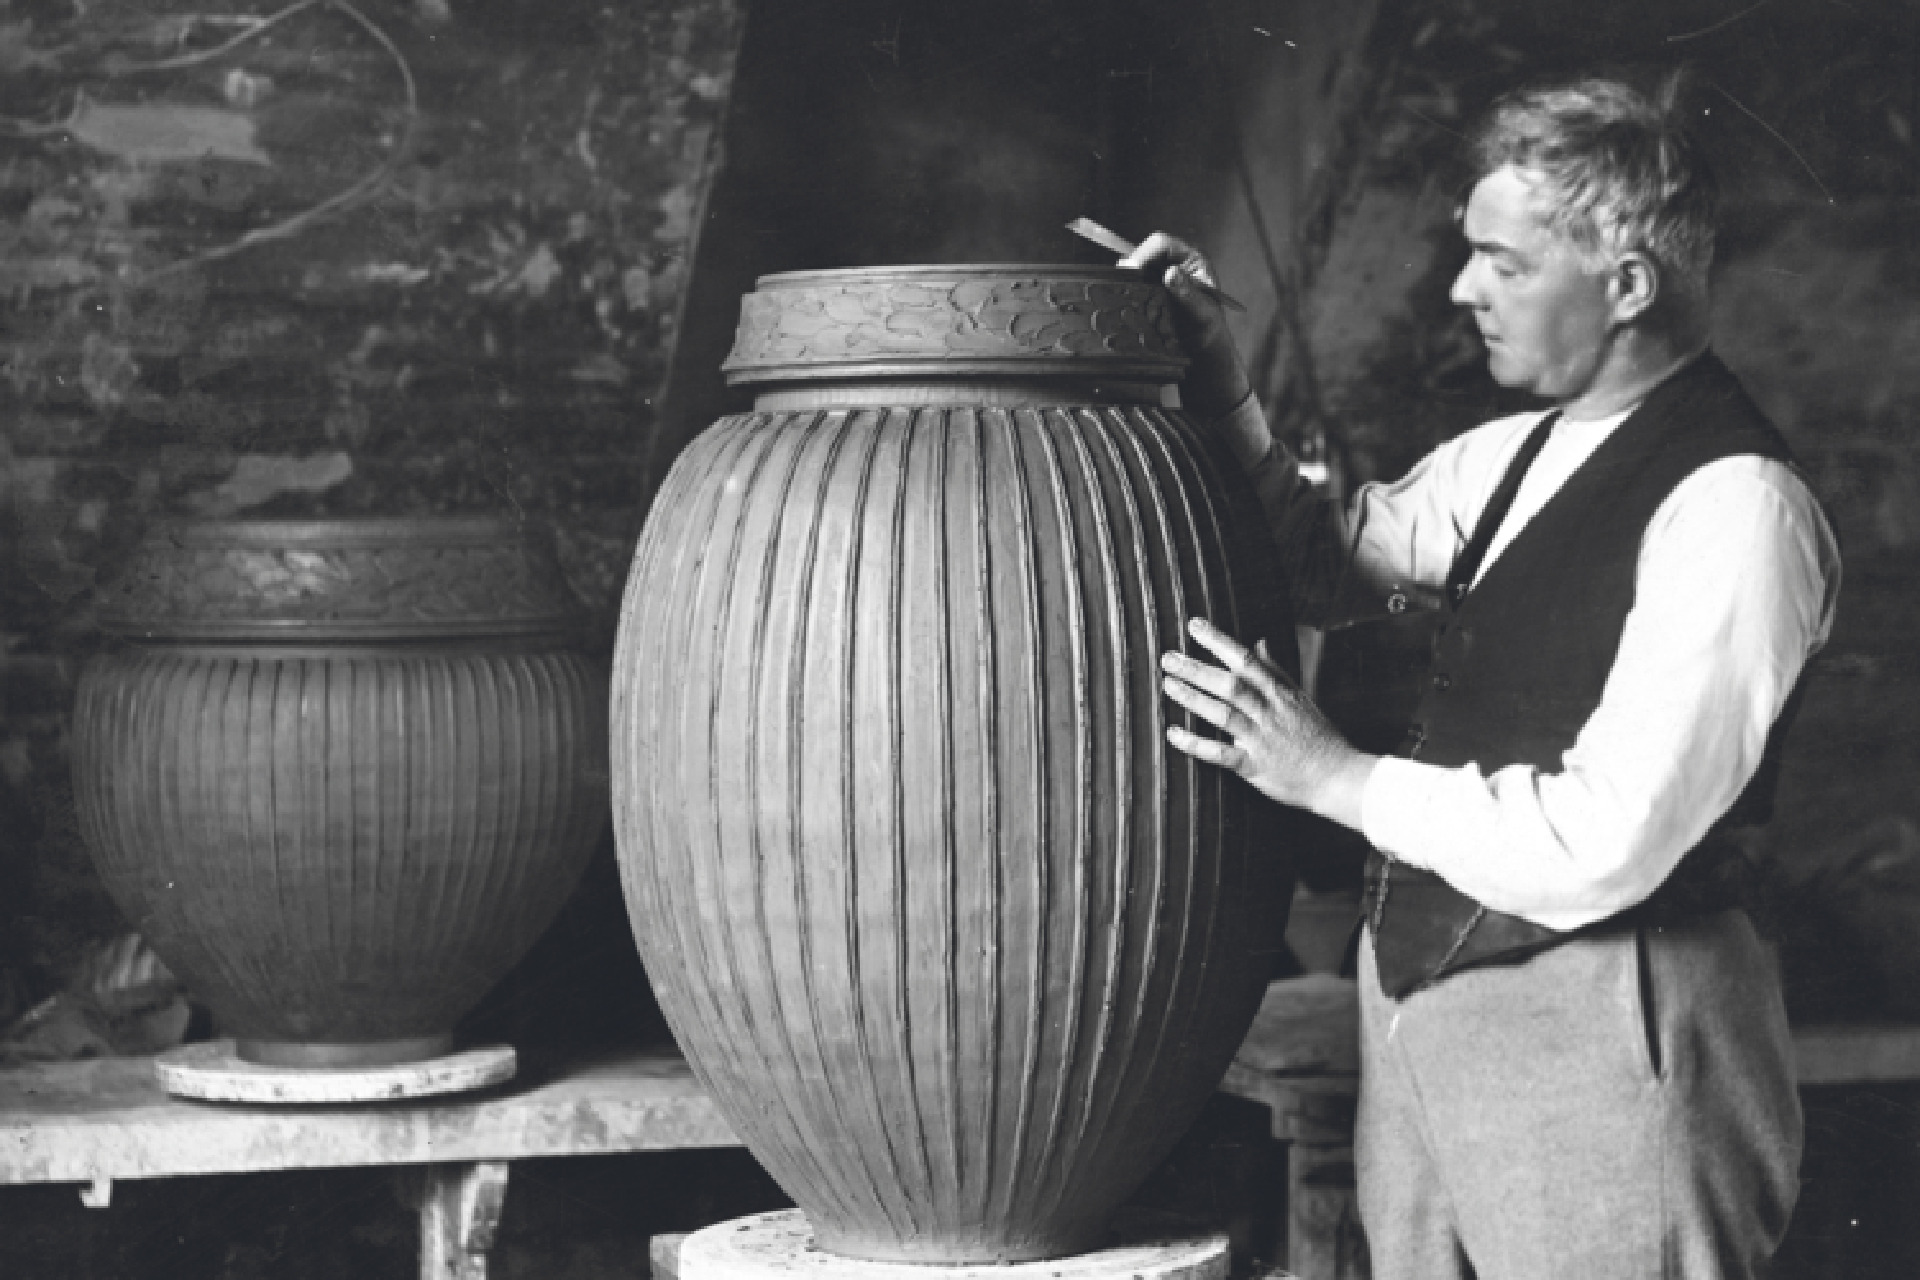 Historical picture of painter and potter Svend Hammershøi with vase